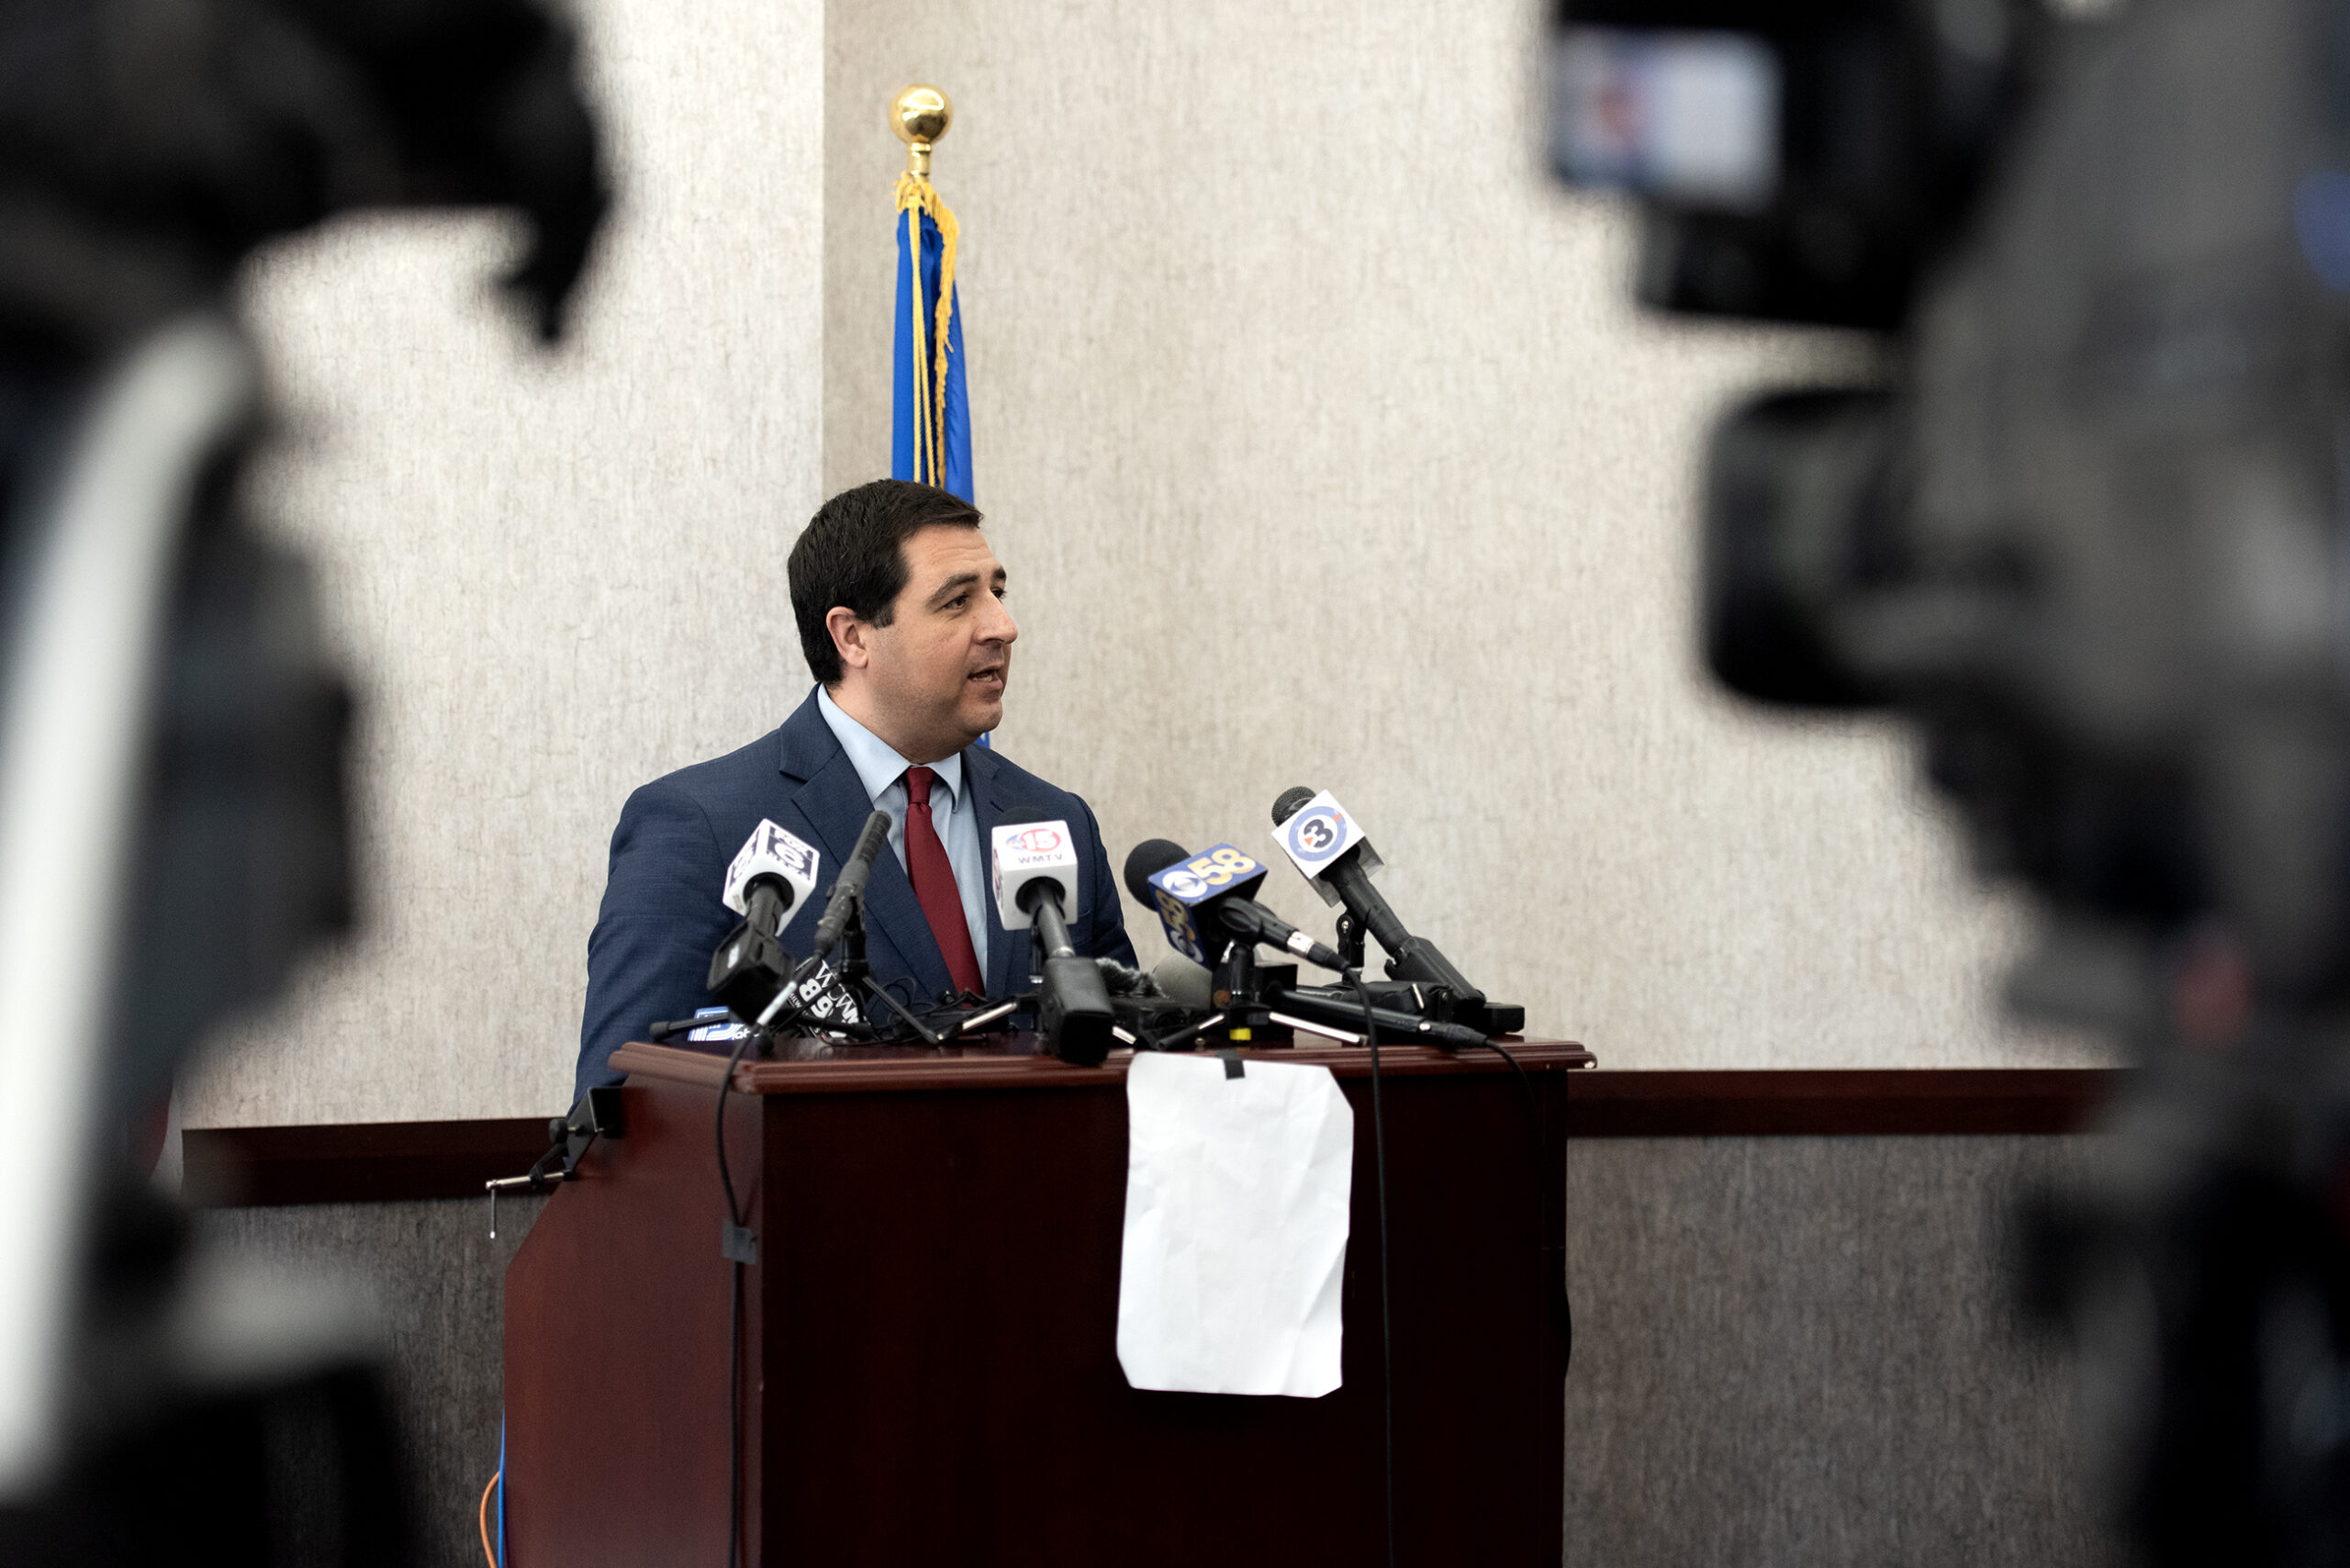 AG Josh Kaul stands in front of microphones and cameras.